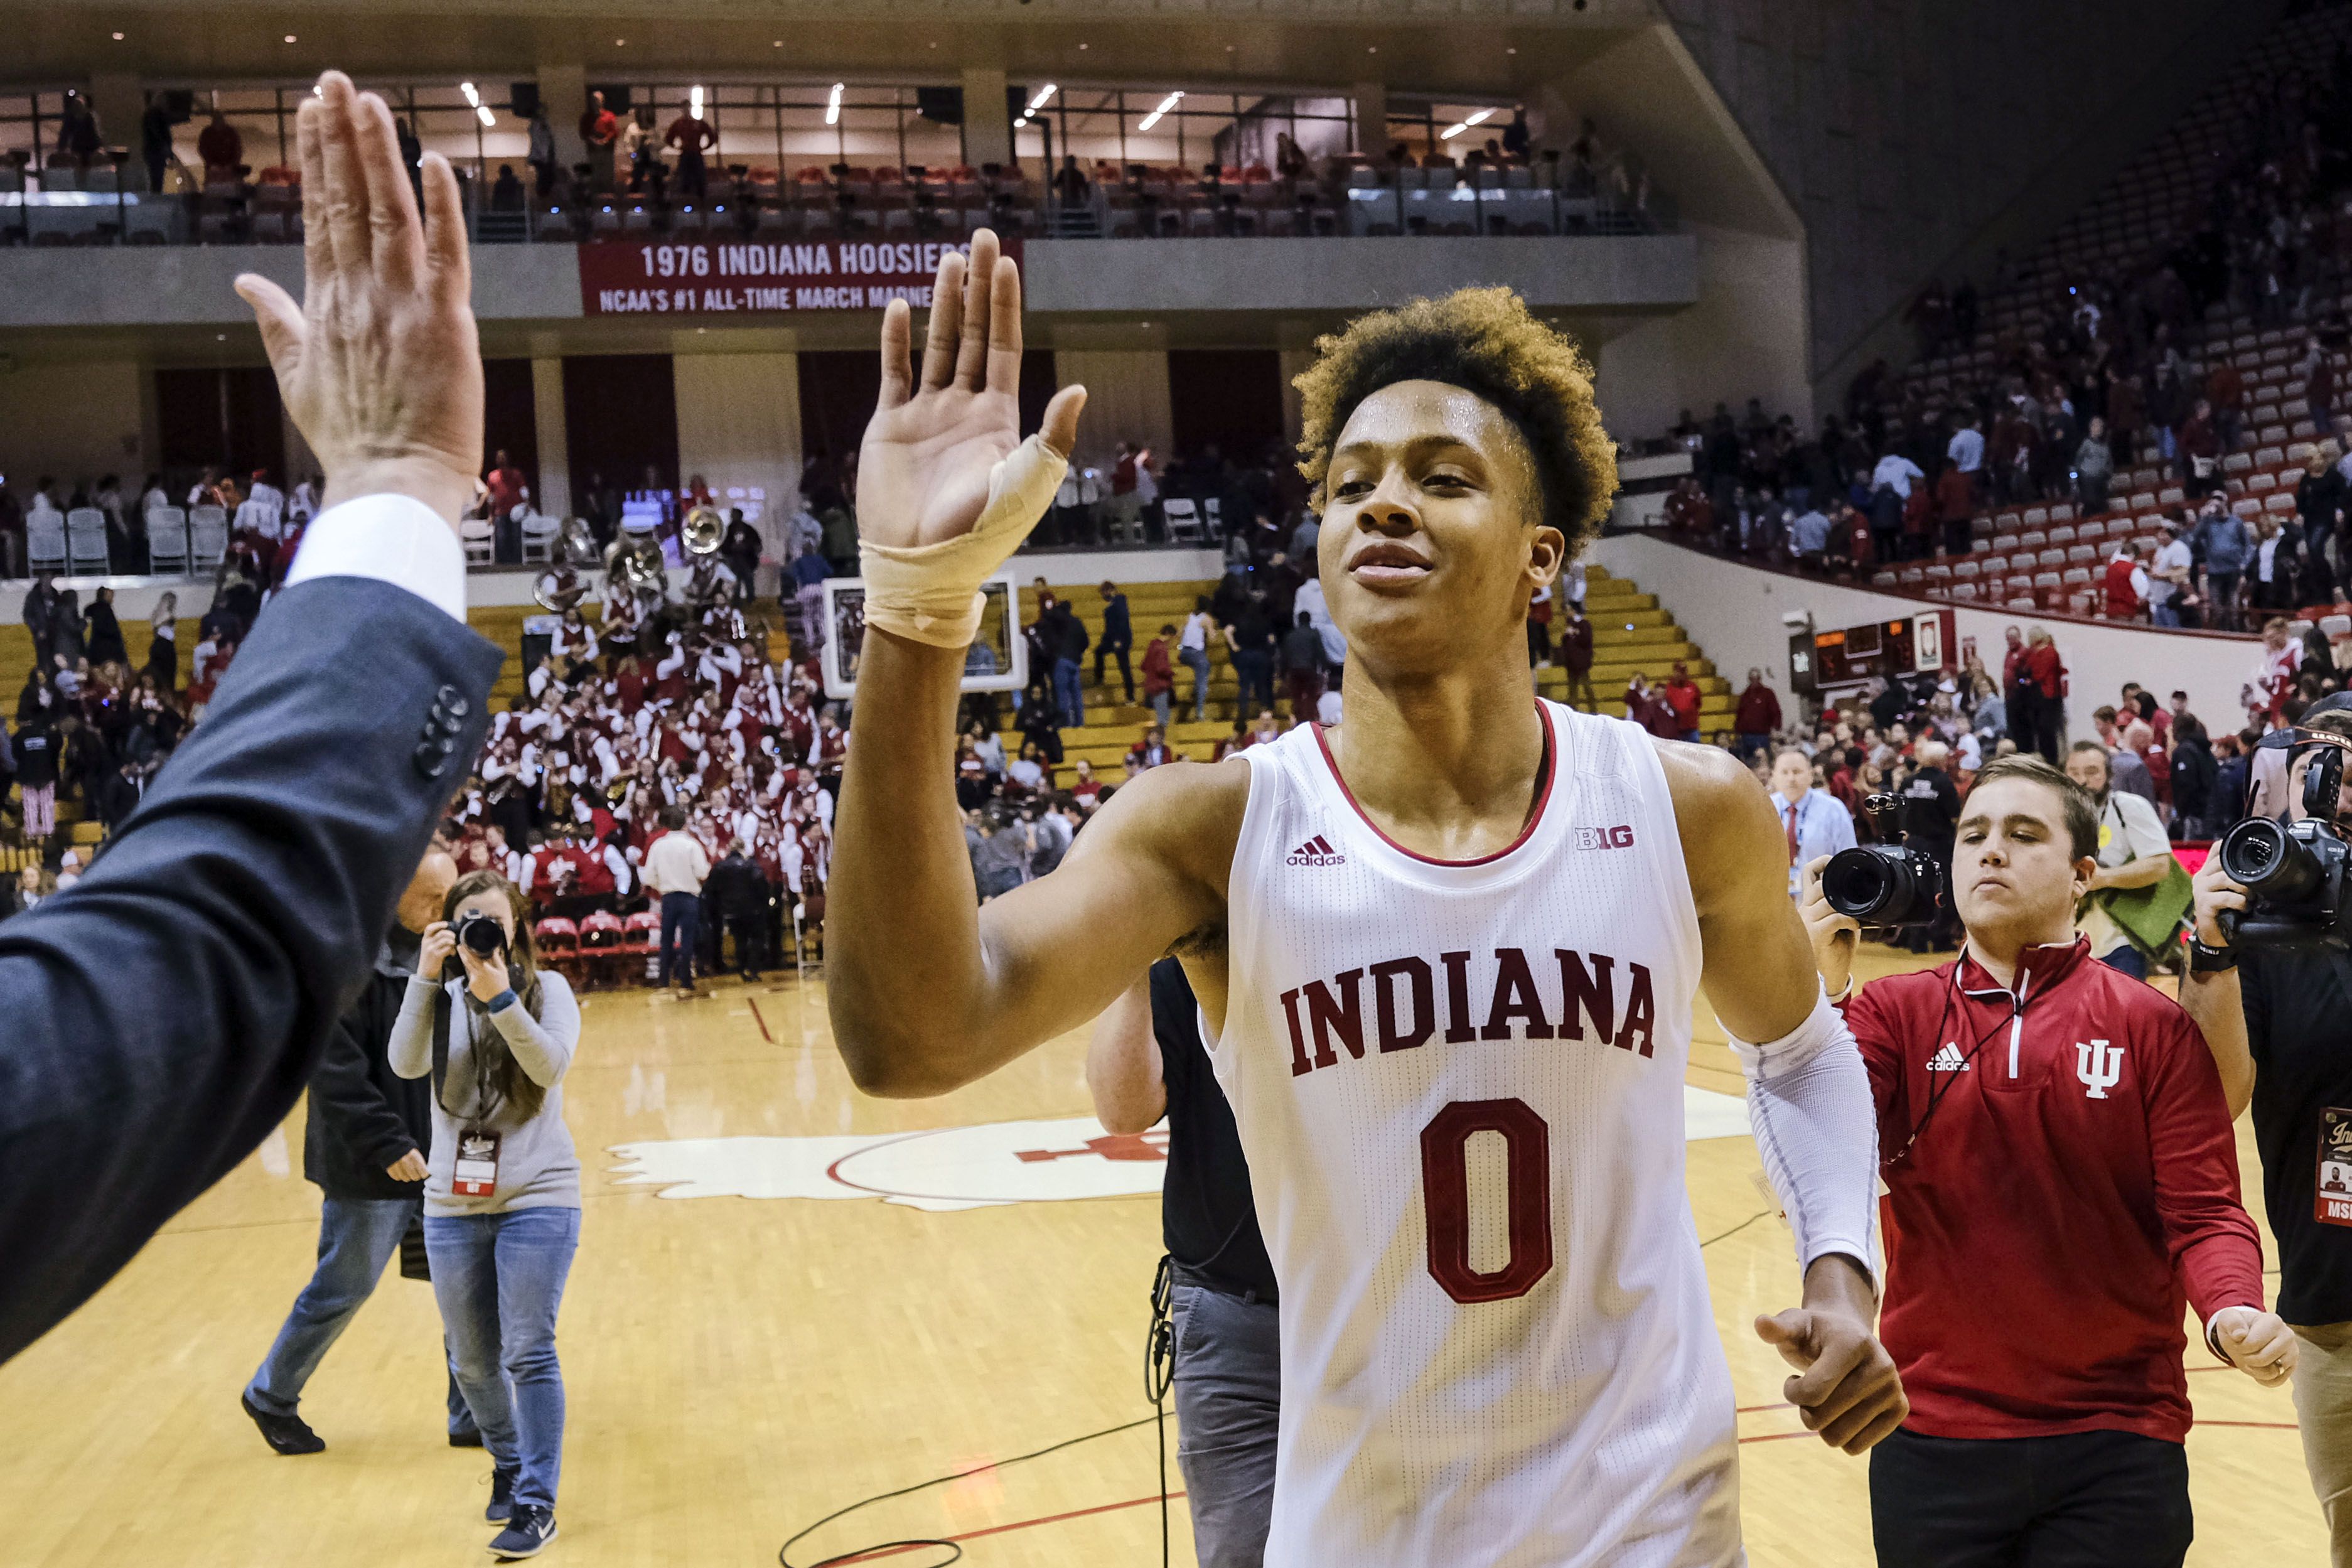 Romeo Langford (@yeahyeah22) • Instagram photos and videos